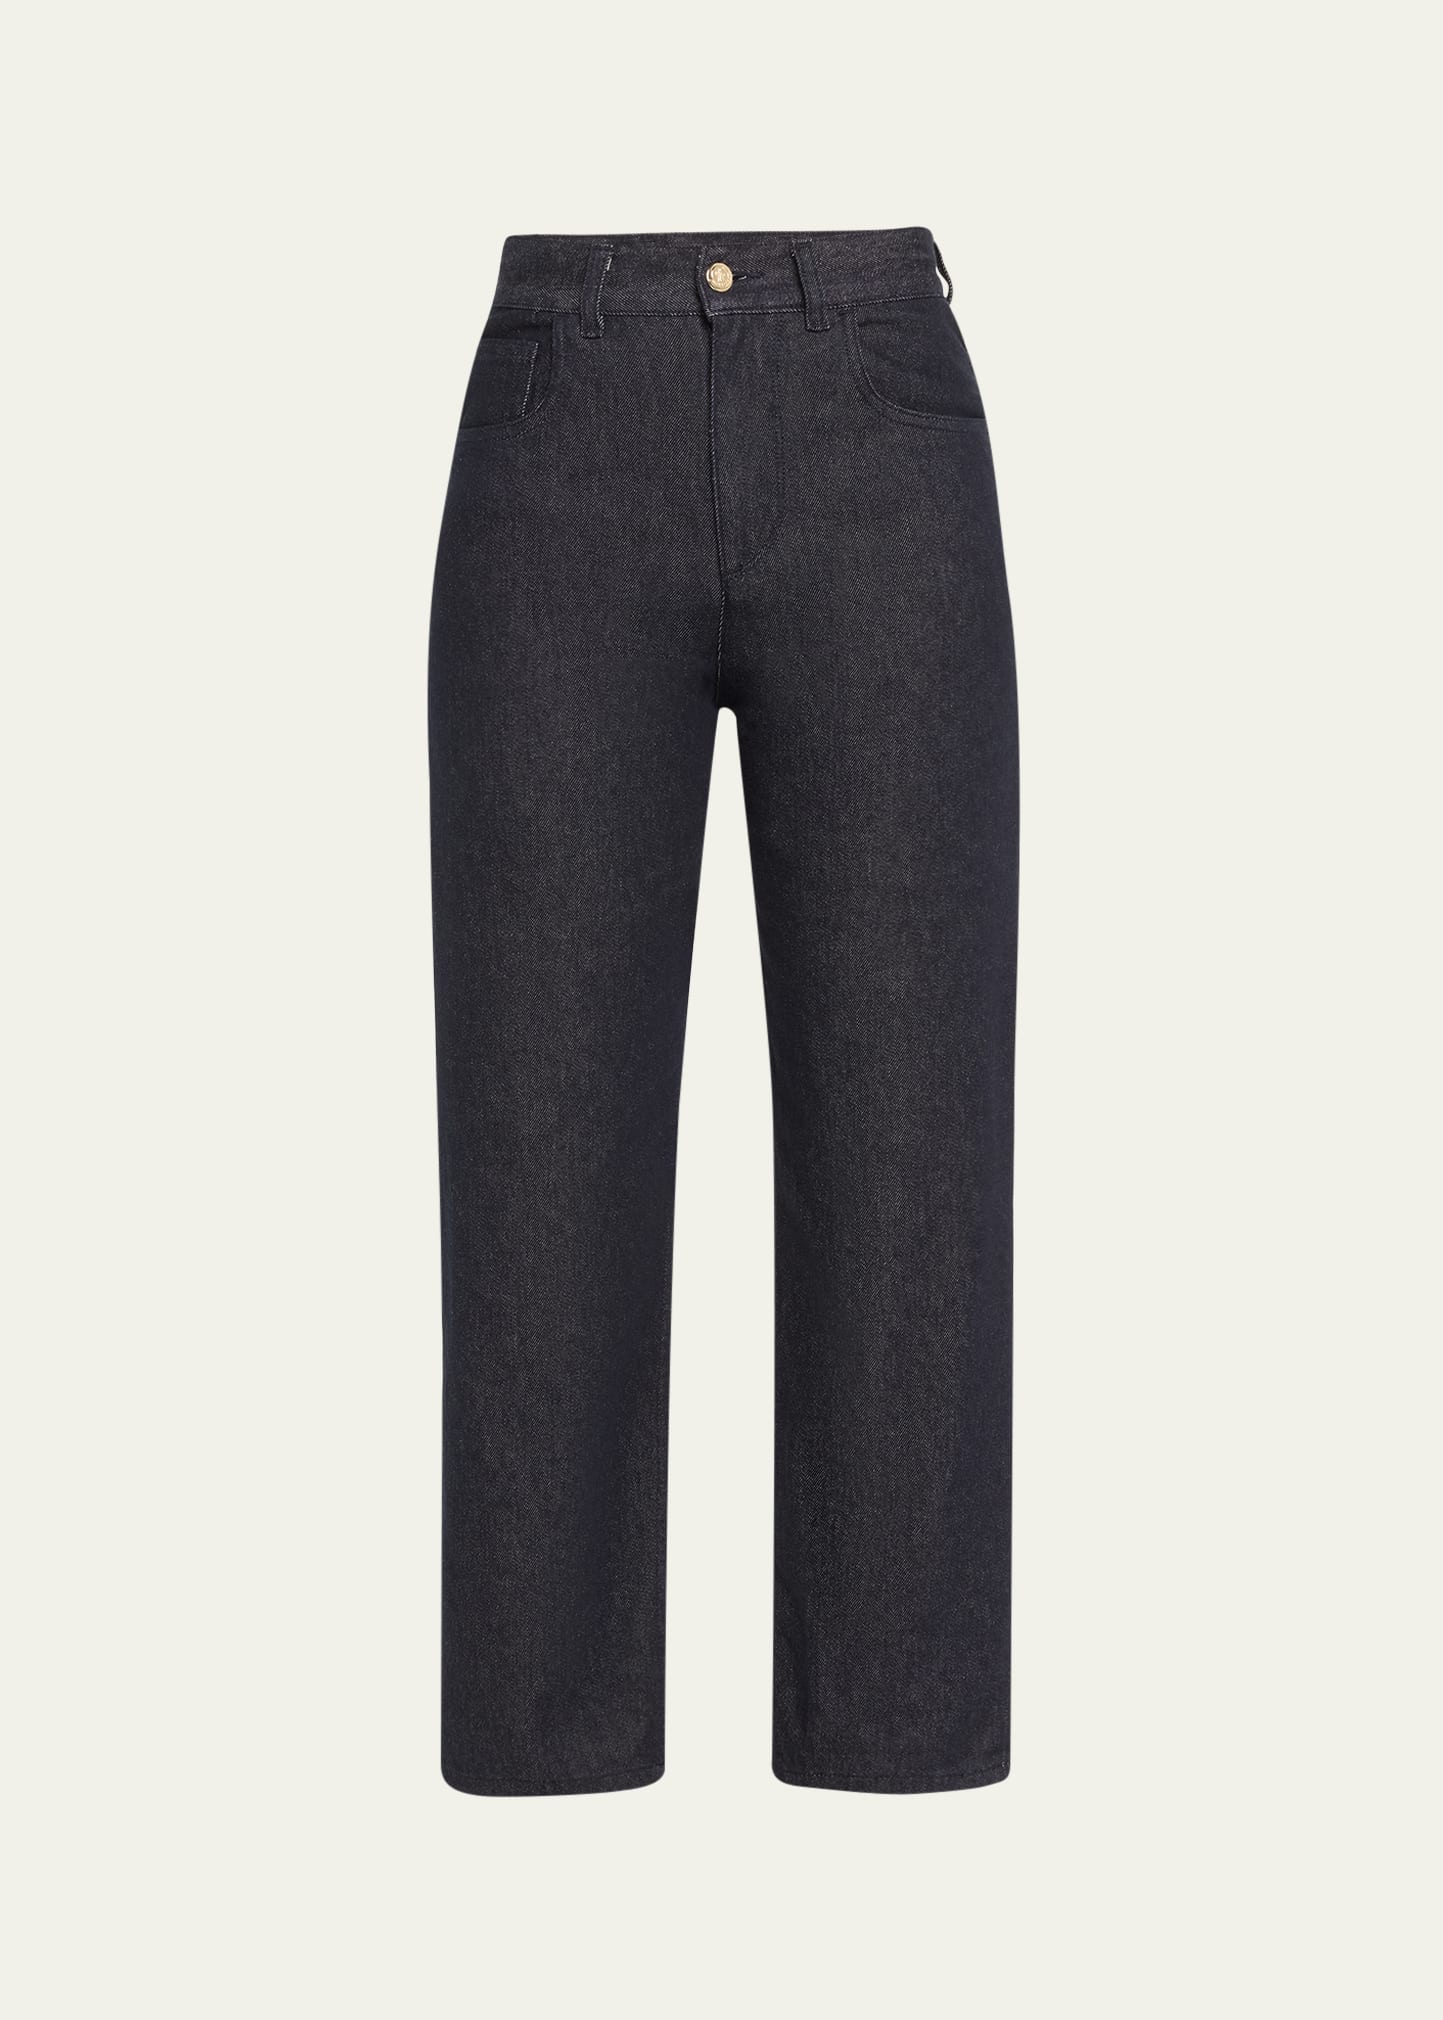 Mid-Rise Straight-Leg Cotton Stretch Trousers